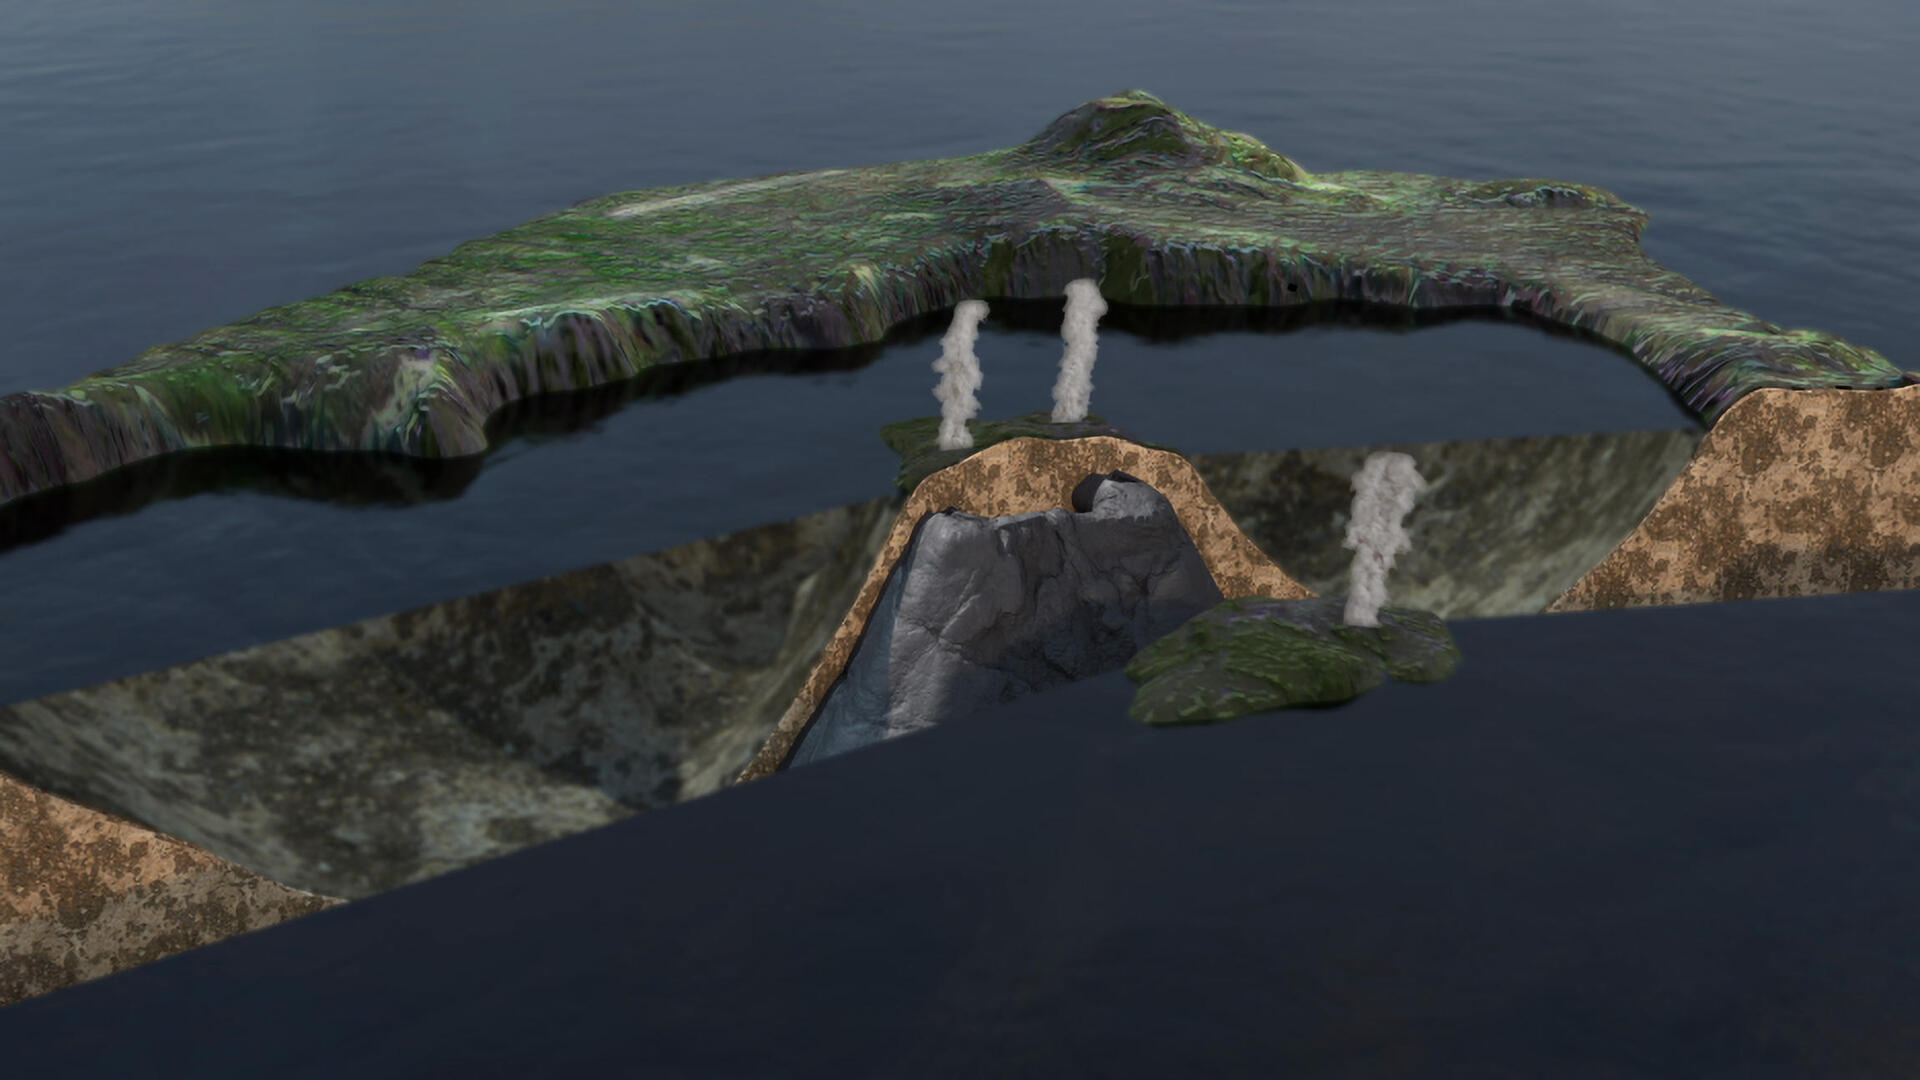 3D Graphic: Under Santorini today, likes evidence of the huge eruption that happened some 3,5000-4,000 years ago.